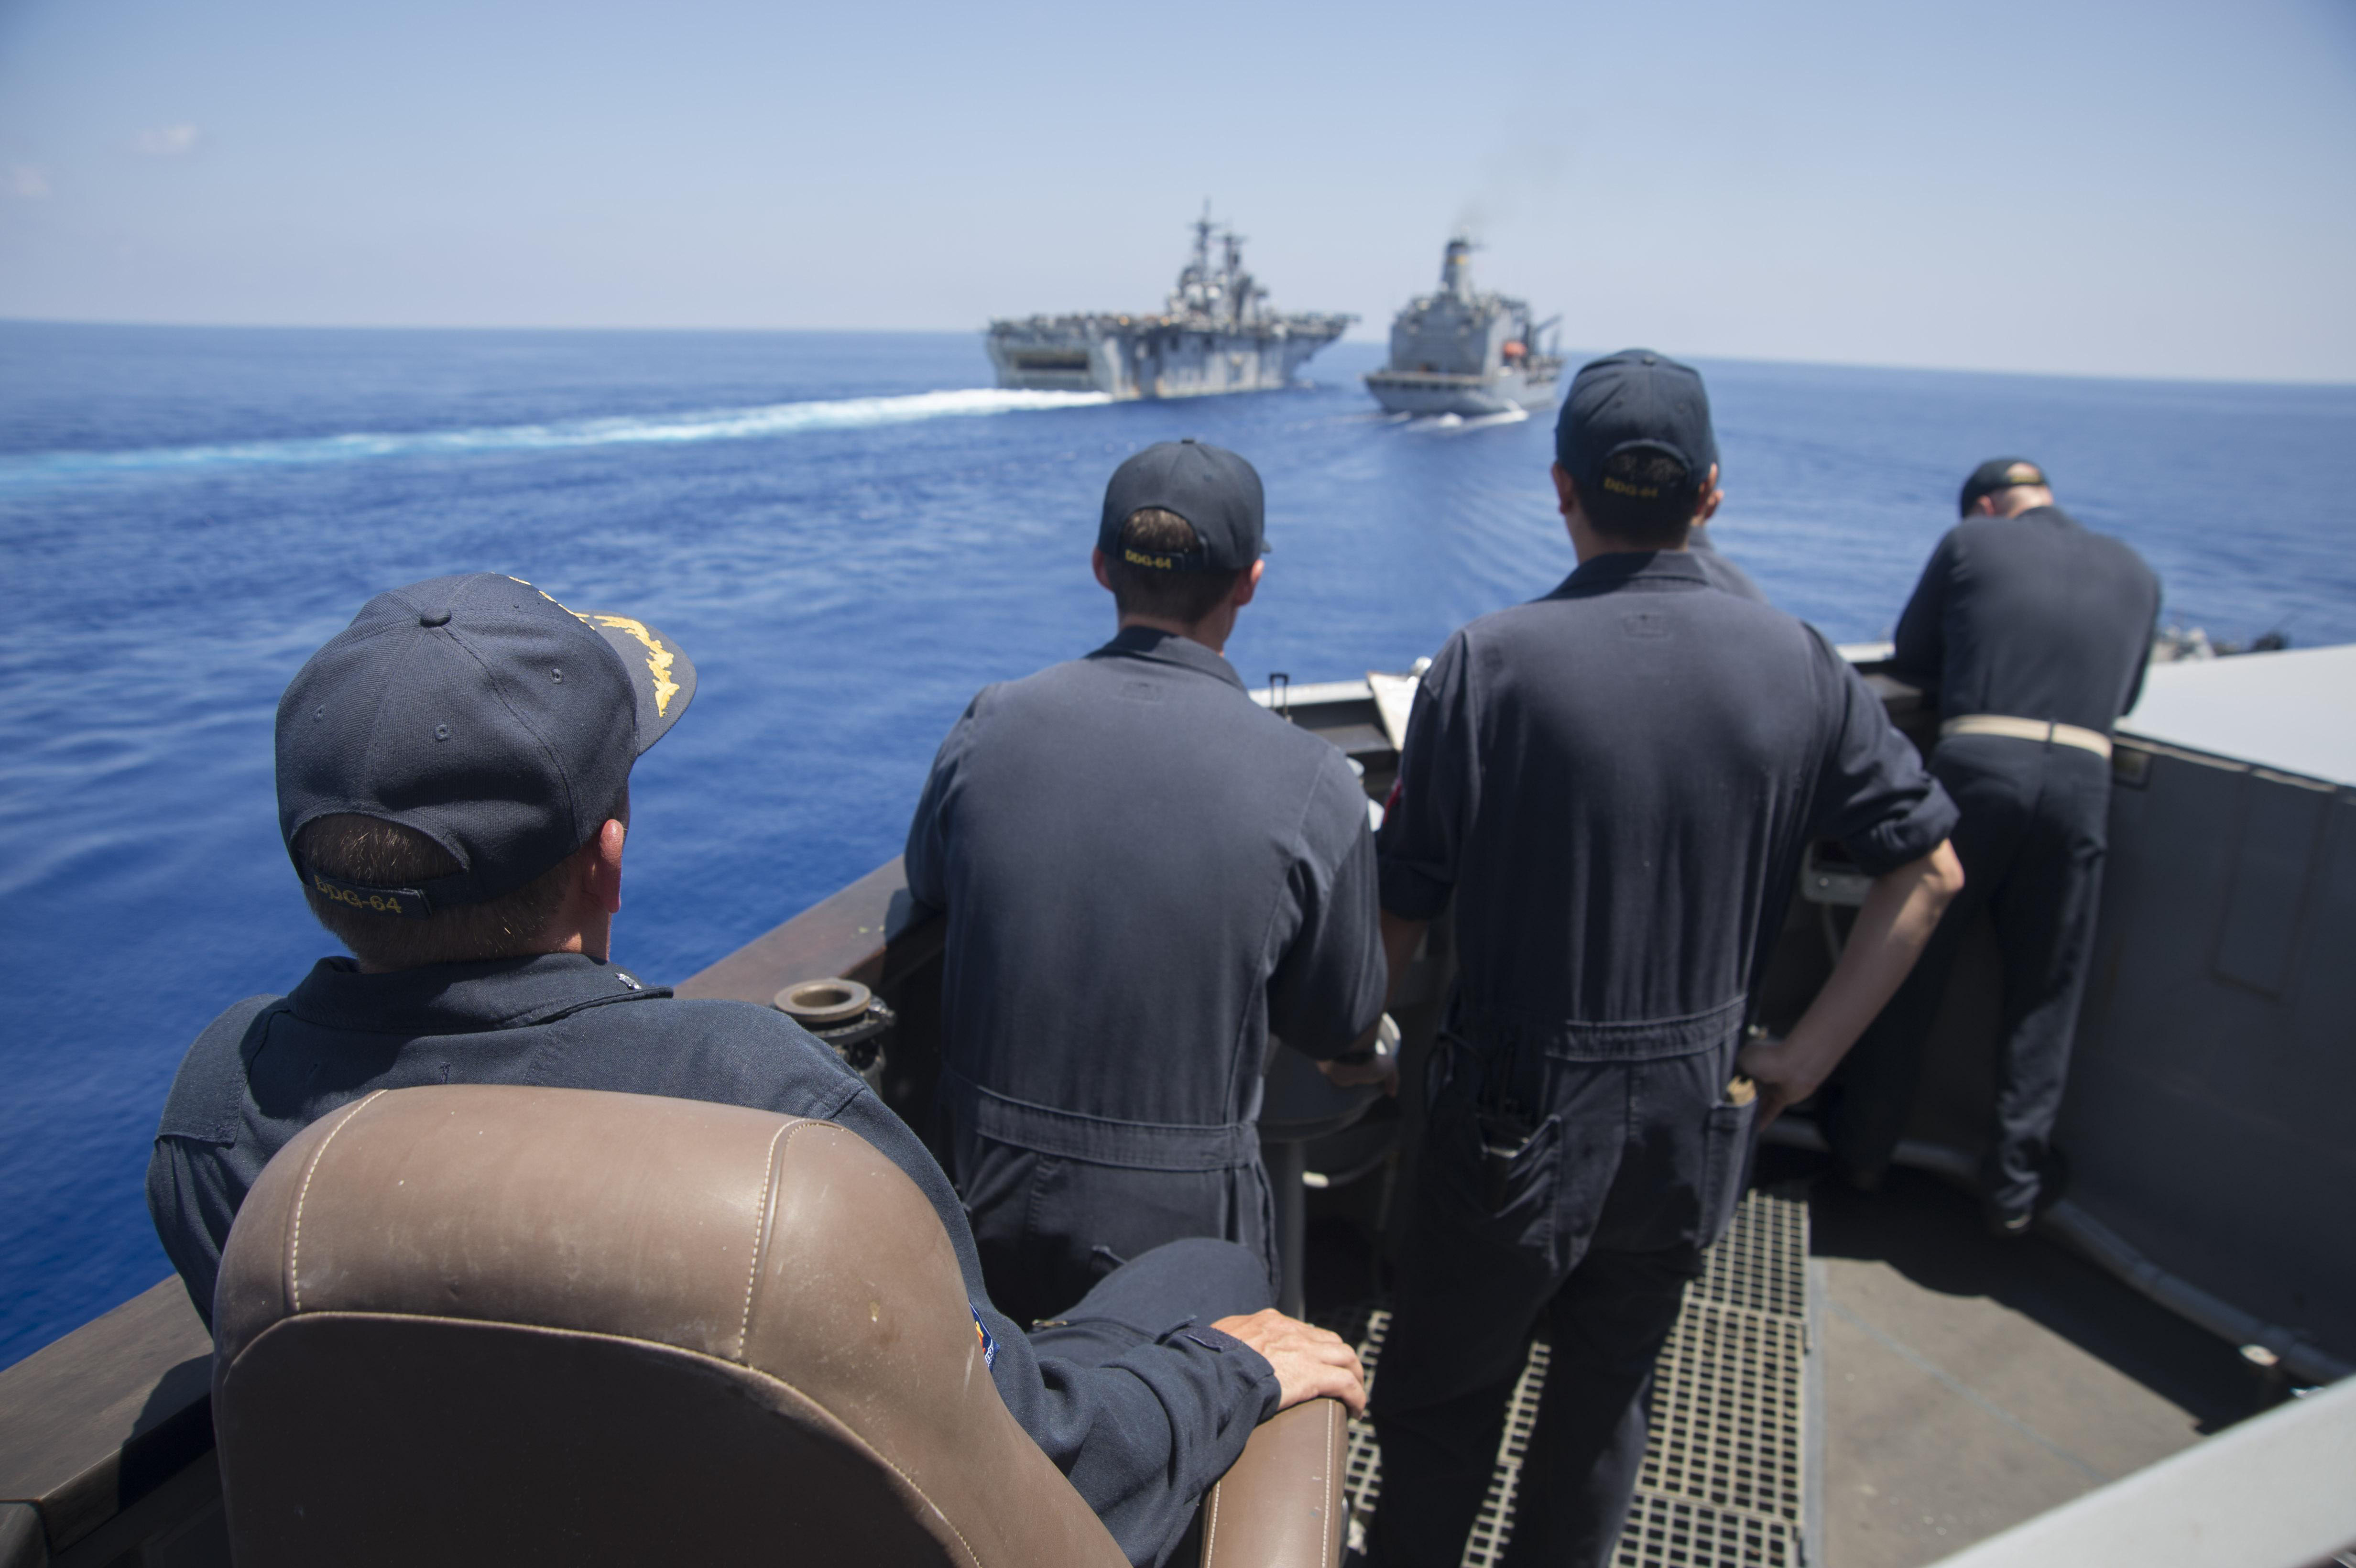 USS Carney (DDG-64) commanding officer Cmdr. Ken Pickard watches the approach to the Military Sealift Command fleet replenishment oiler USNS Big Horn (T-AO-198) and USS Wasp (LHD 1) during a replenishment-at-sea in the Mediterranean Sea on Aug. 6, 2016. US Navy photo.